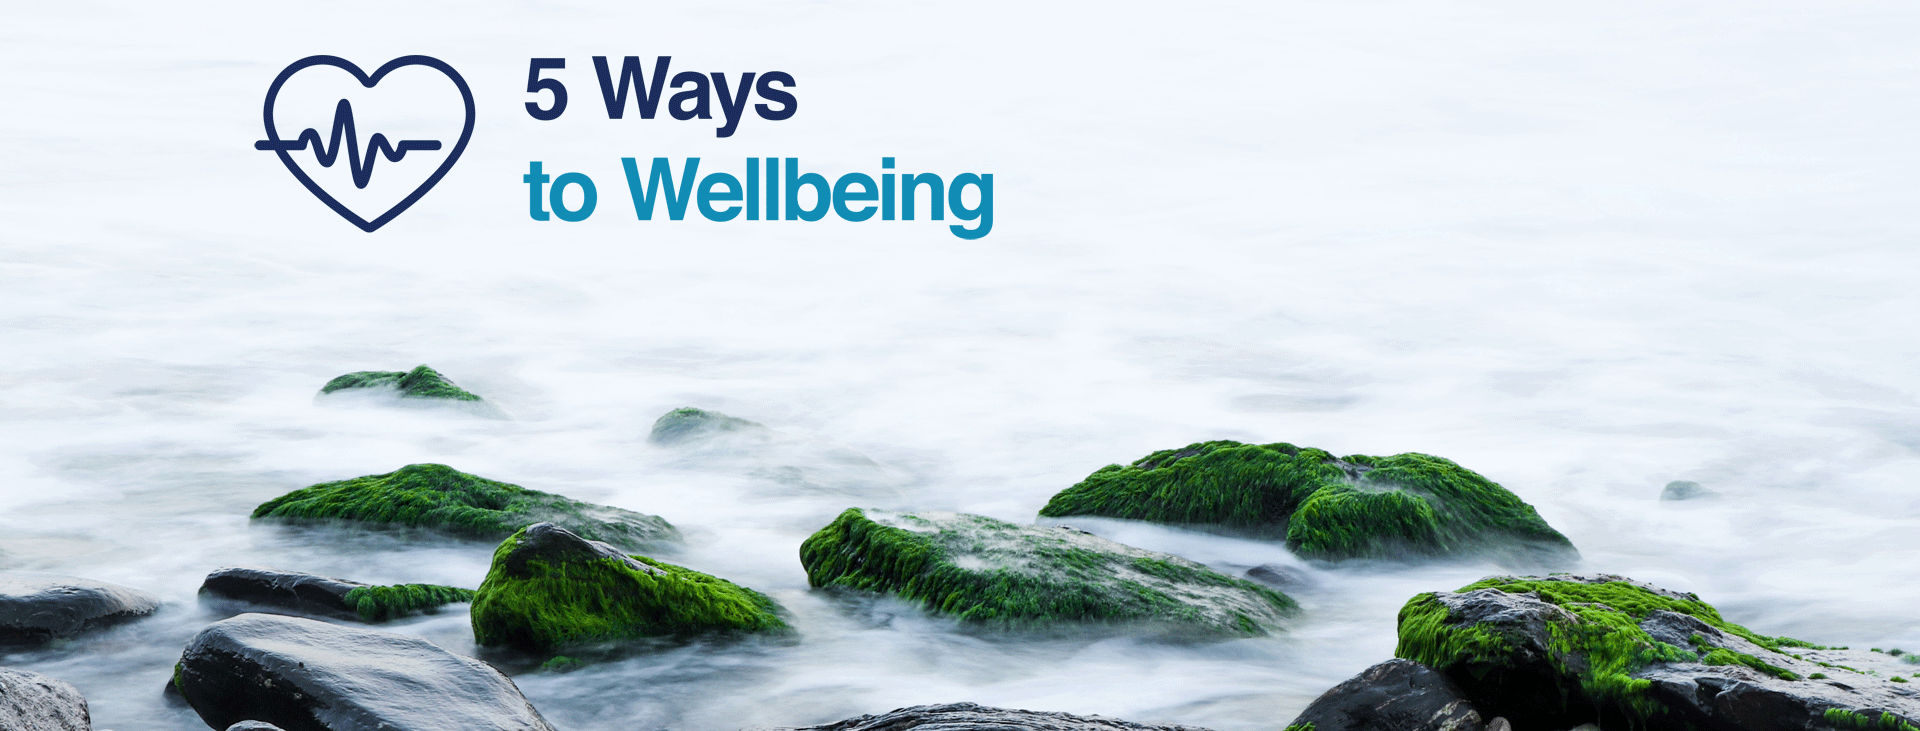 Moss covered rocks in water with 5 ways to wellbeing logo